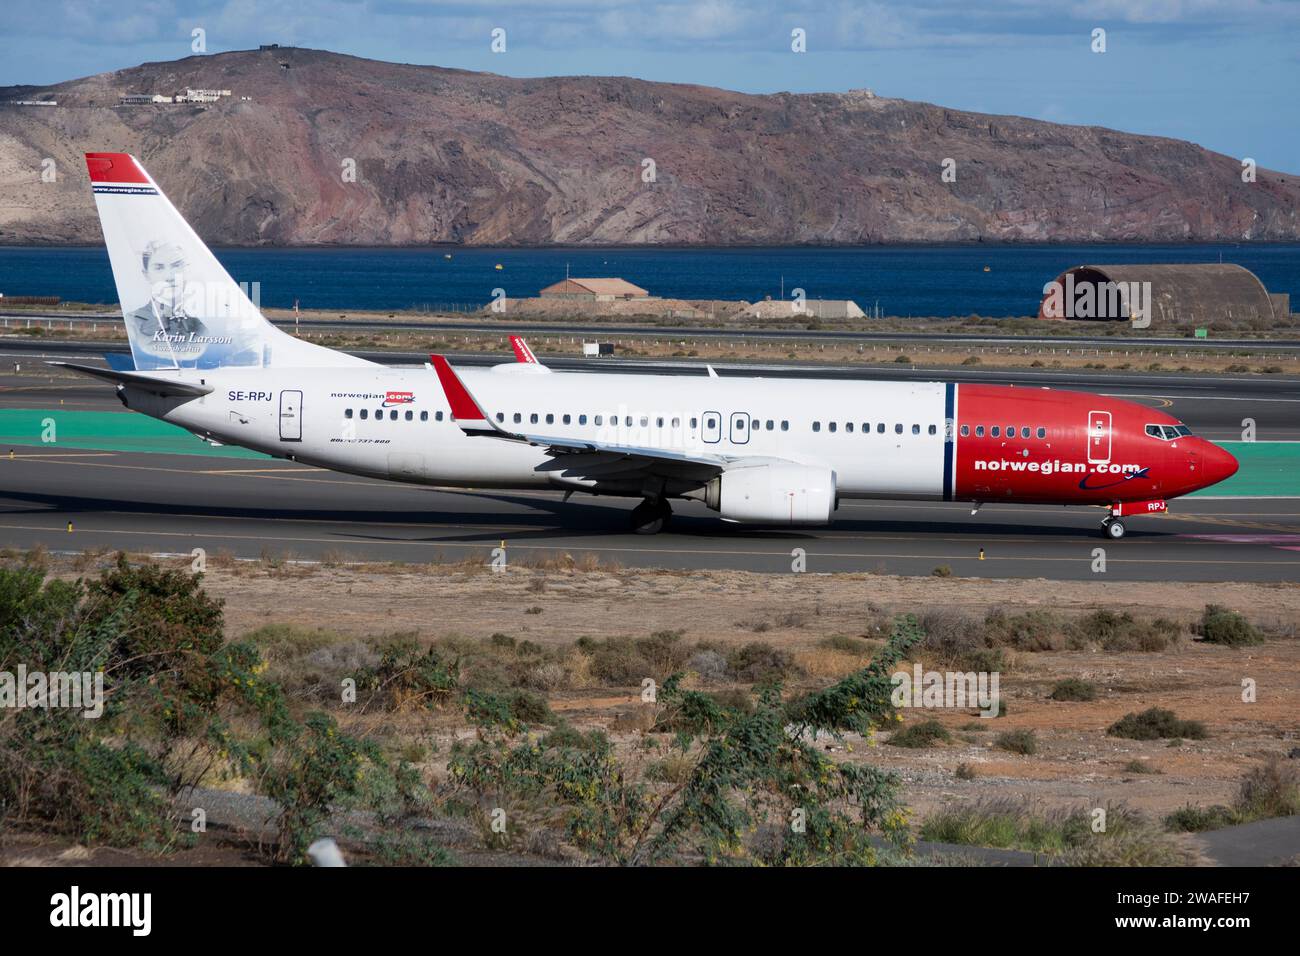 Boeing 737 airliner of the Norwegian Air Sweden airline Stock Photo